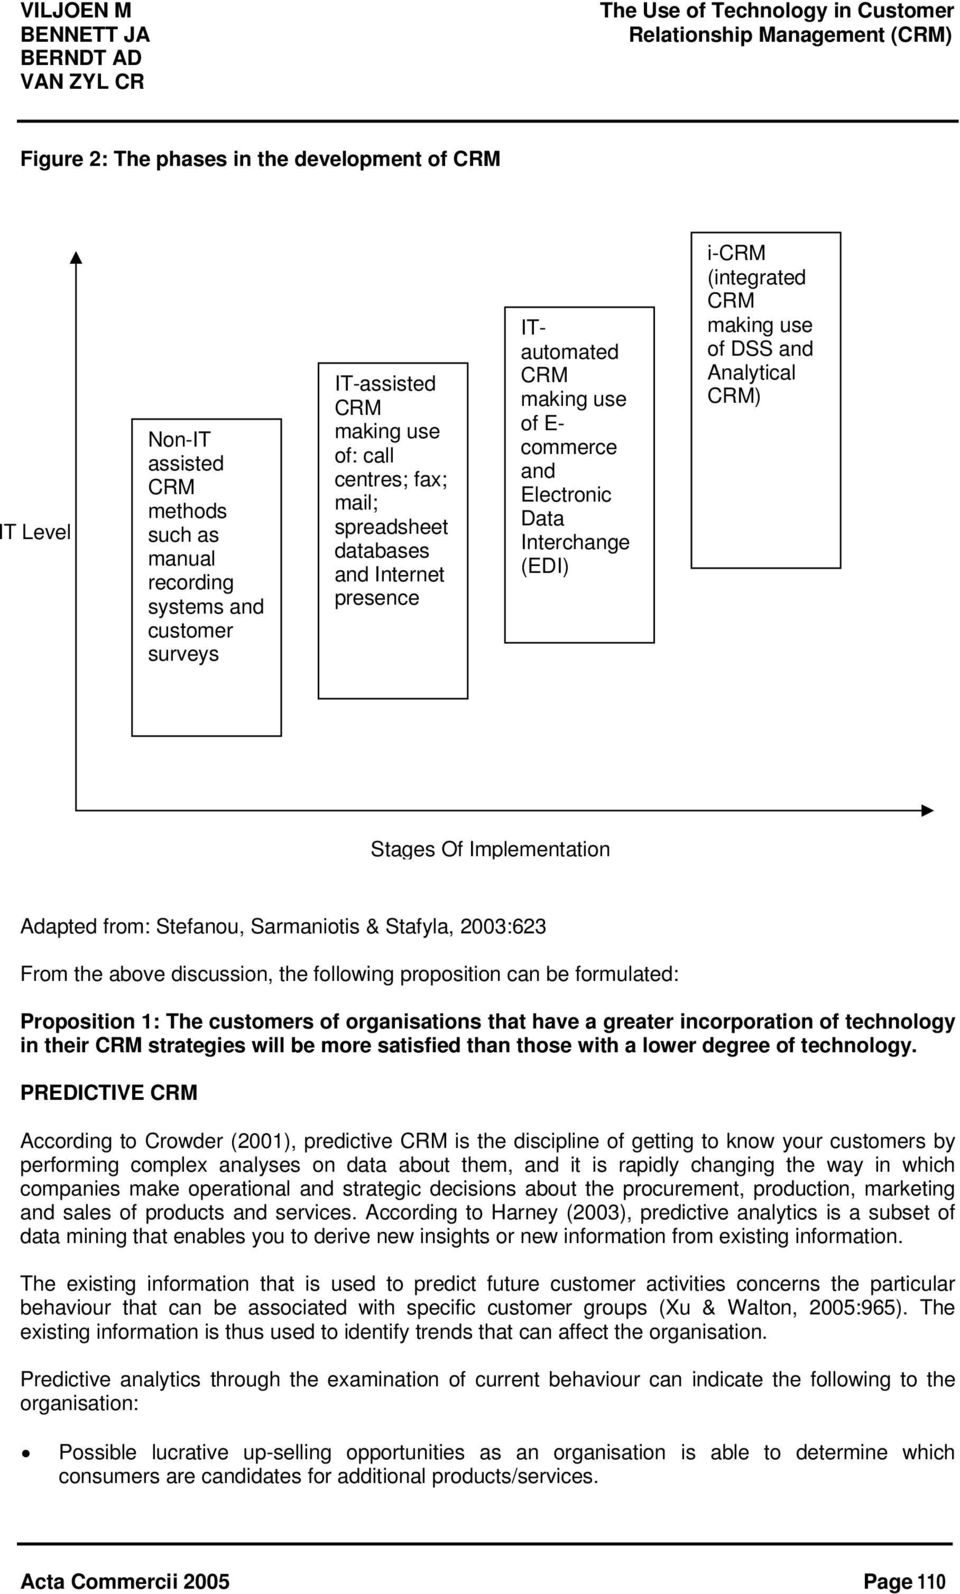 Implementation Adapted from: Stefanou, Sarmaniotis & Stafyla, 2003:623 From the above discussion, the following proposition can be formulated: Proposition 1: The customers of organisations that have